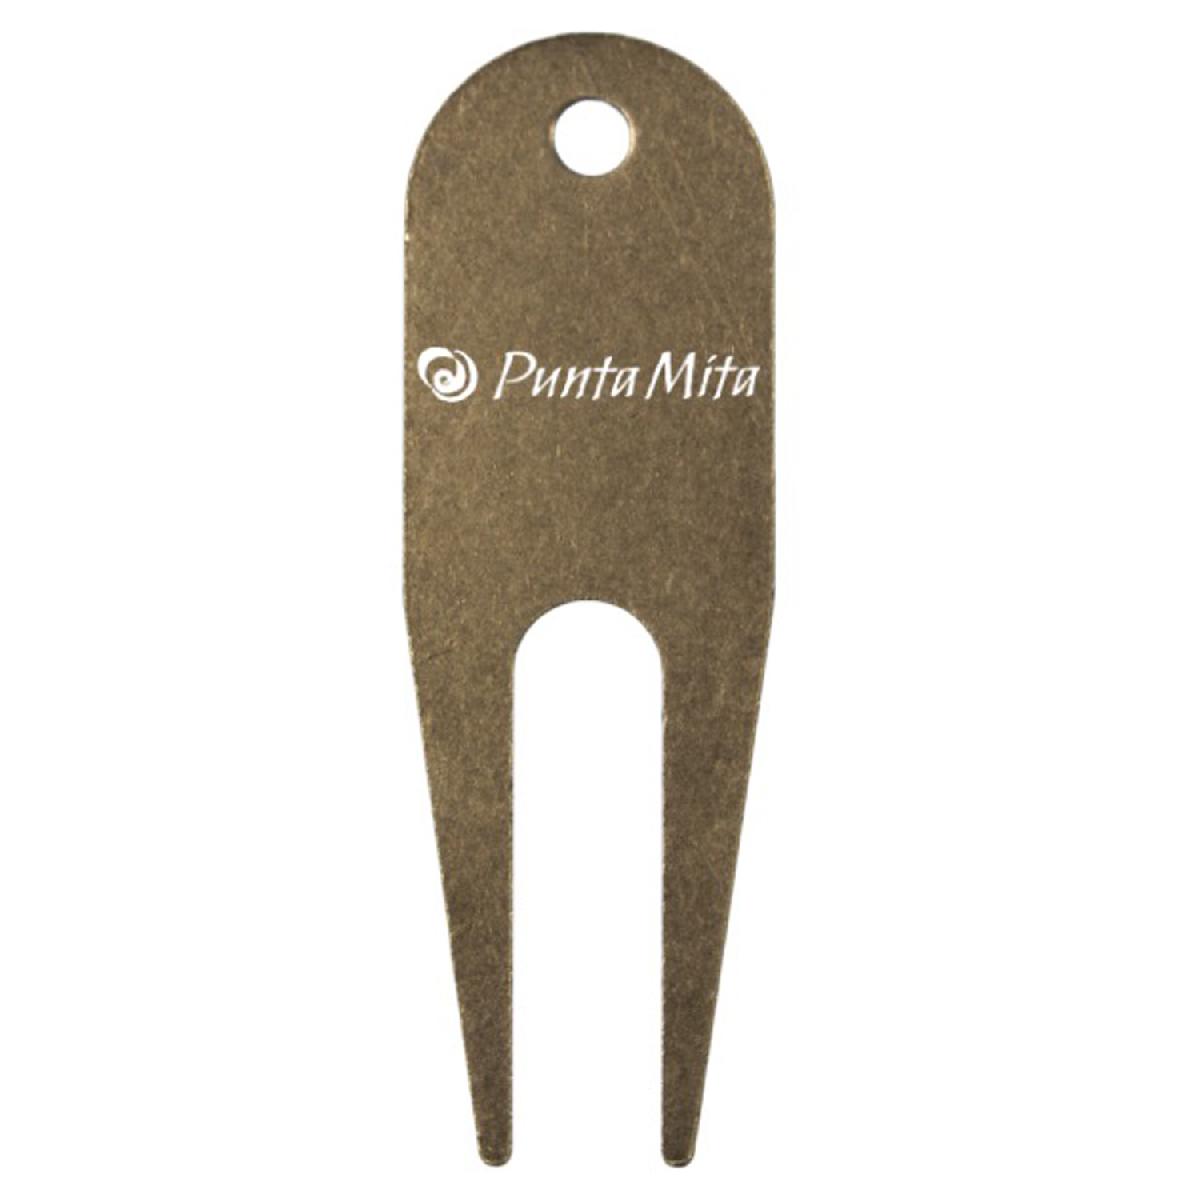 Classic Metal Divot Tool With Round Top - Printed Logo